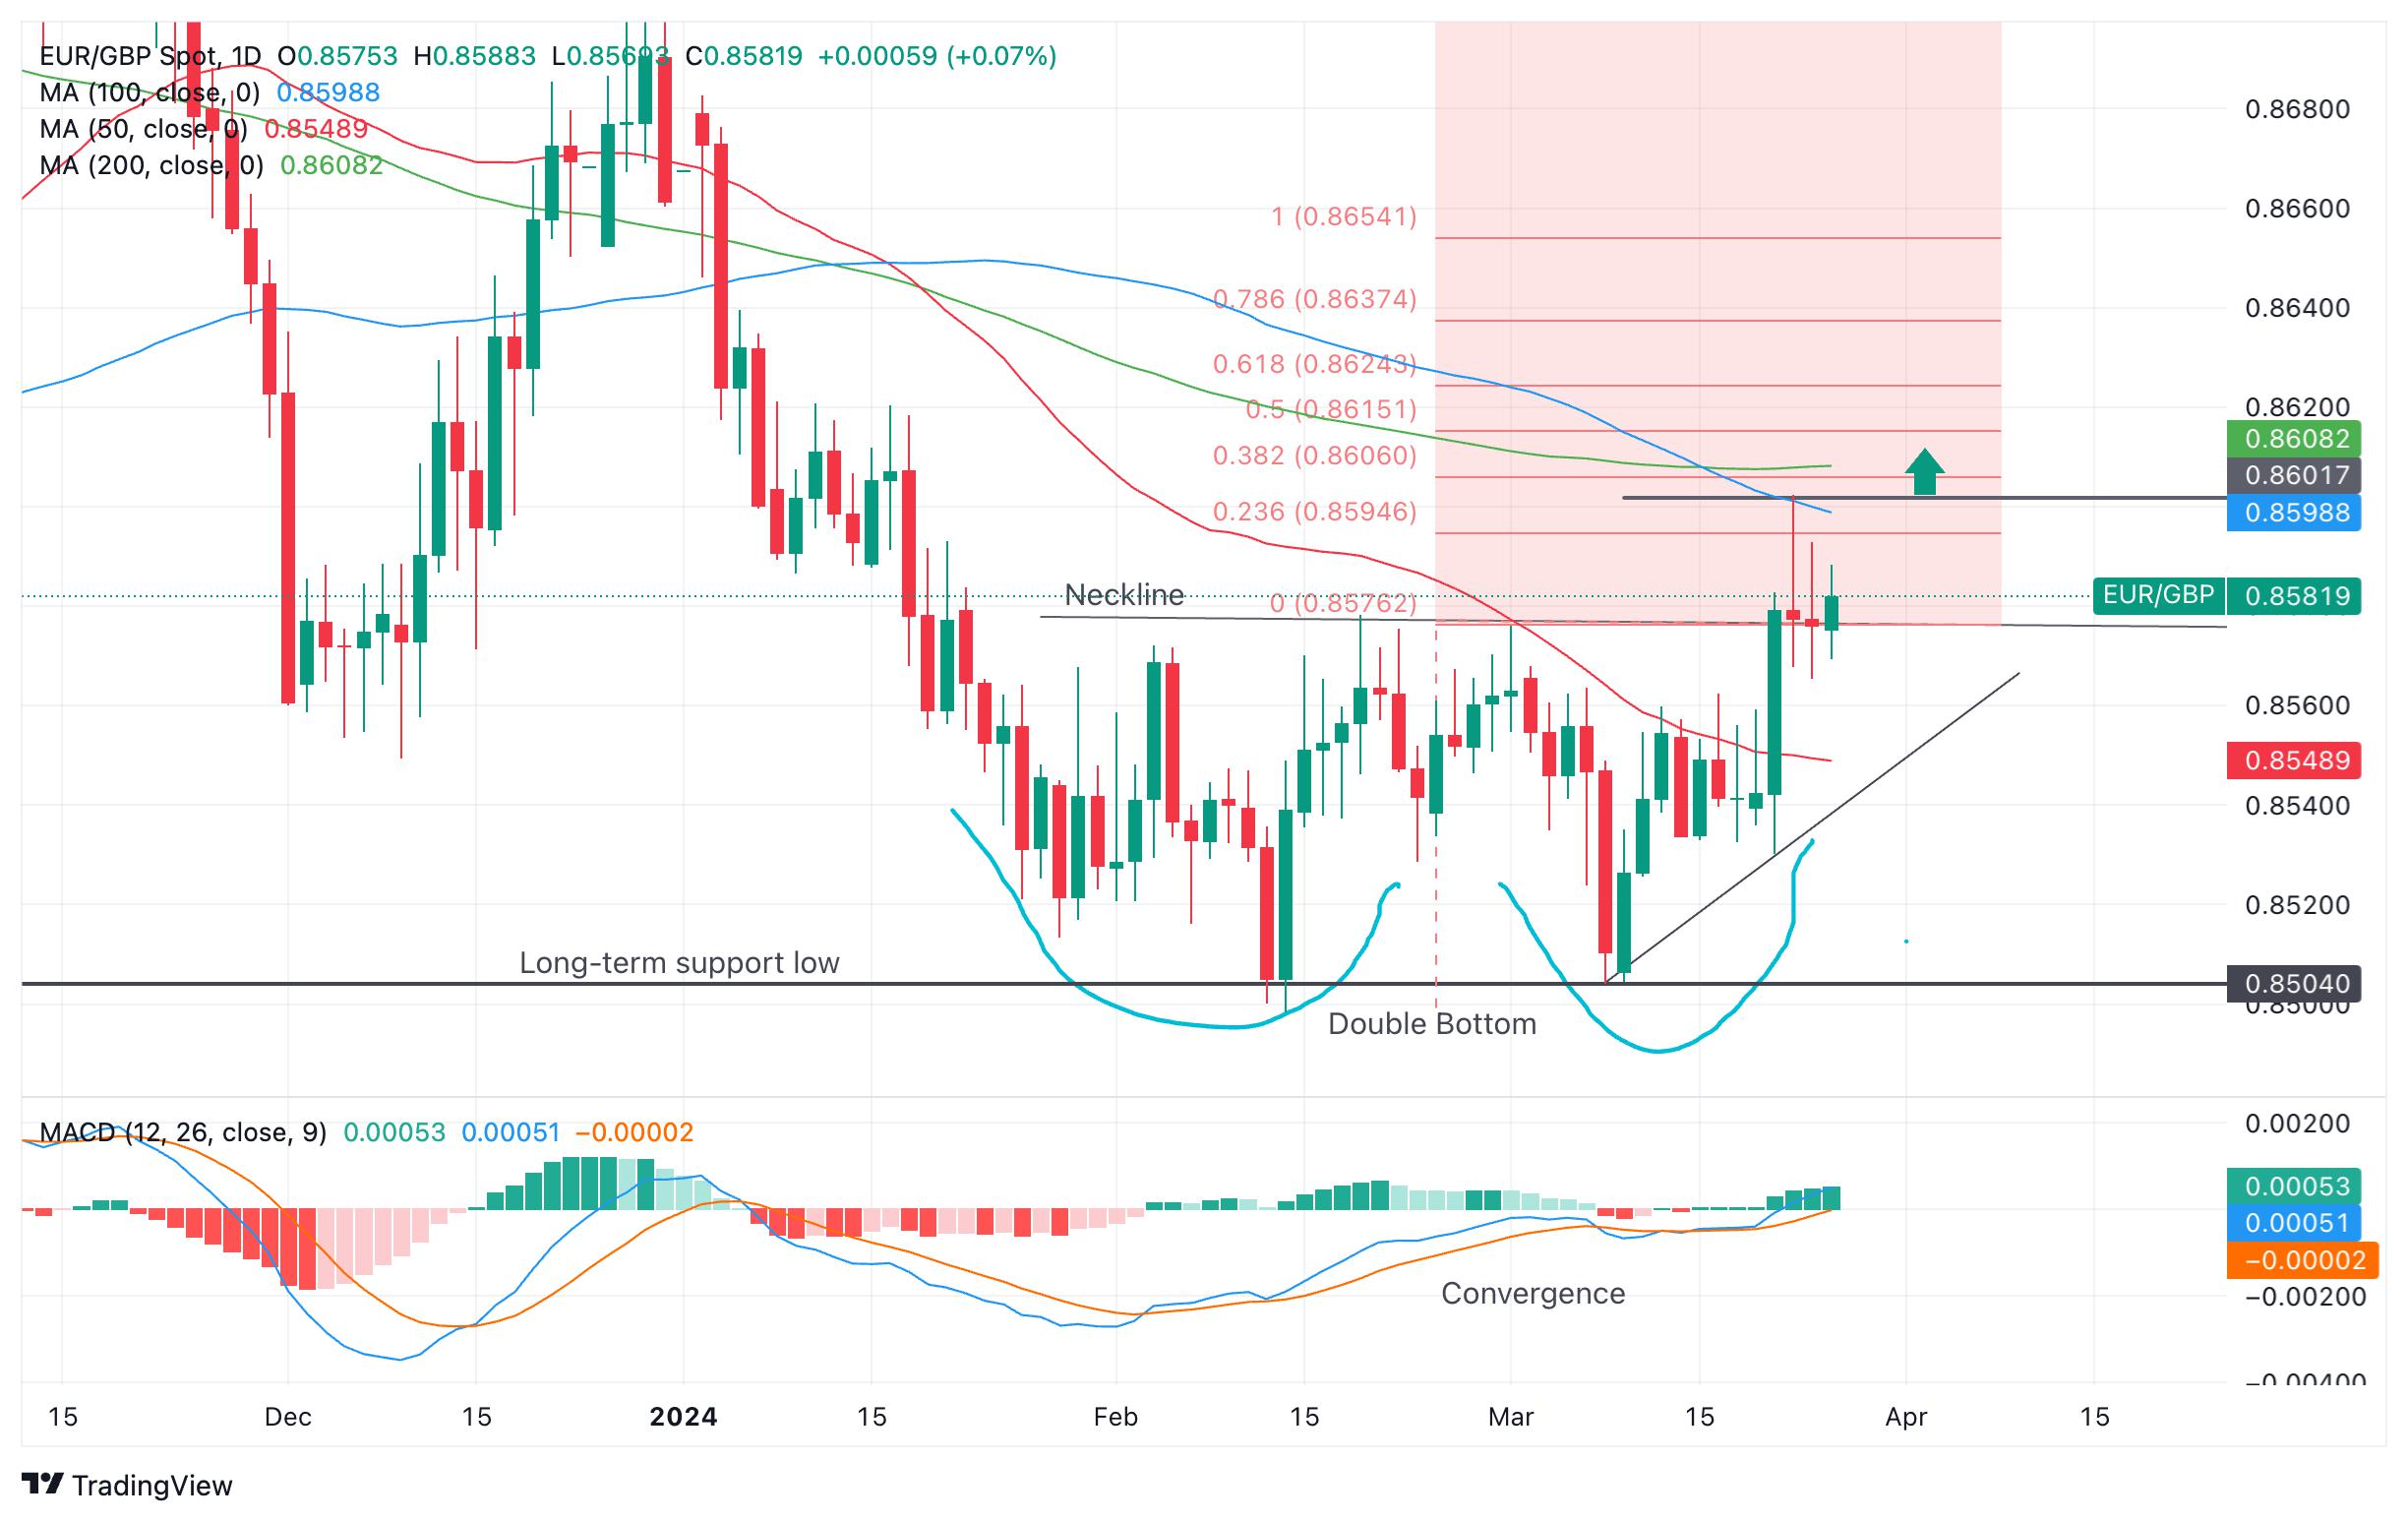 EUR/GBP Price Analysis: Completion of possible Double Bottom pattern